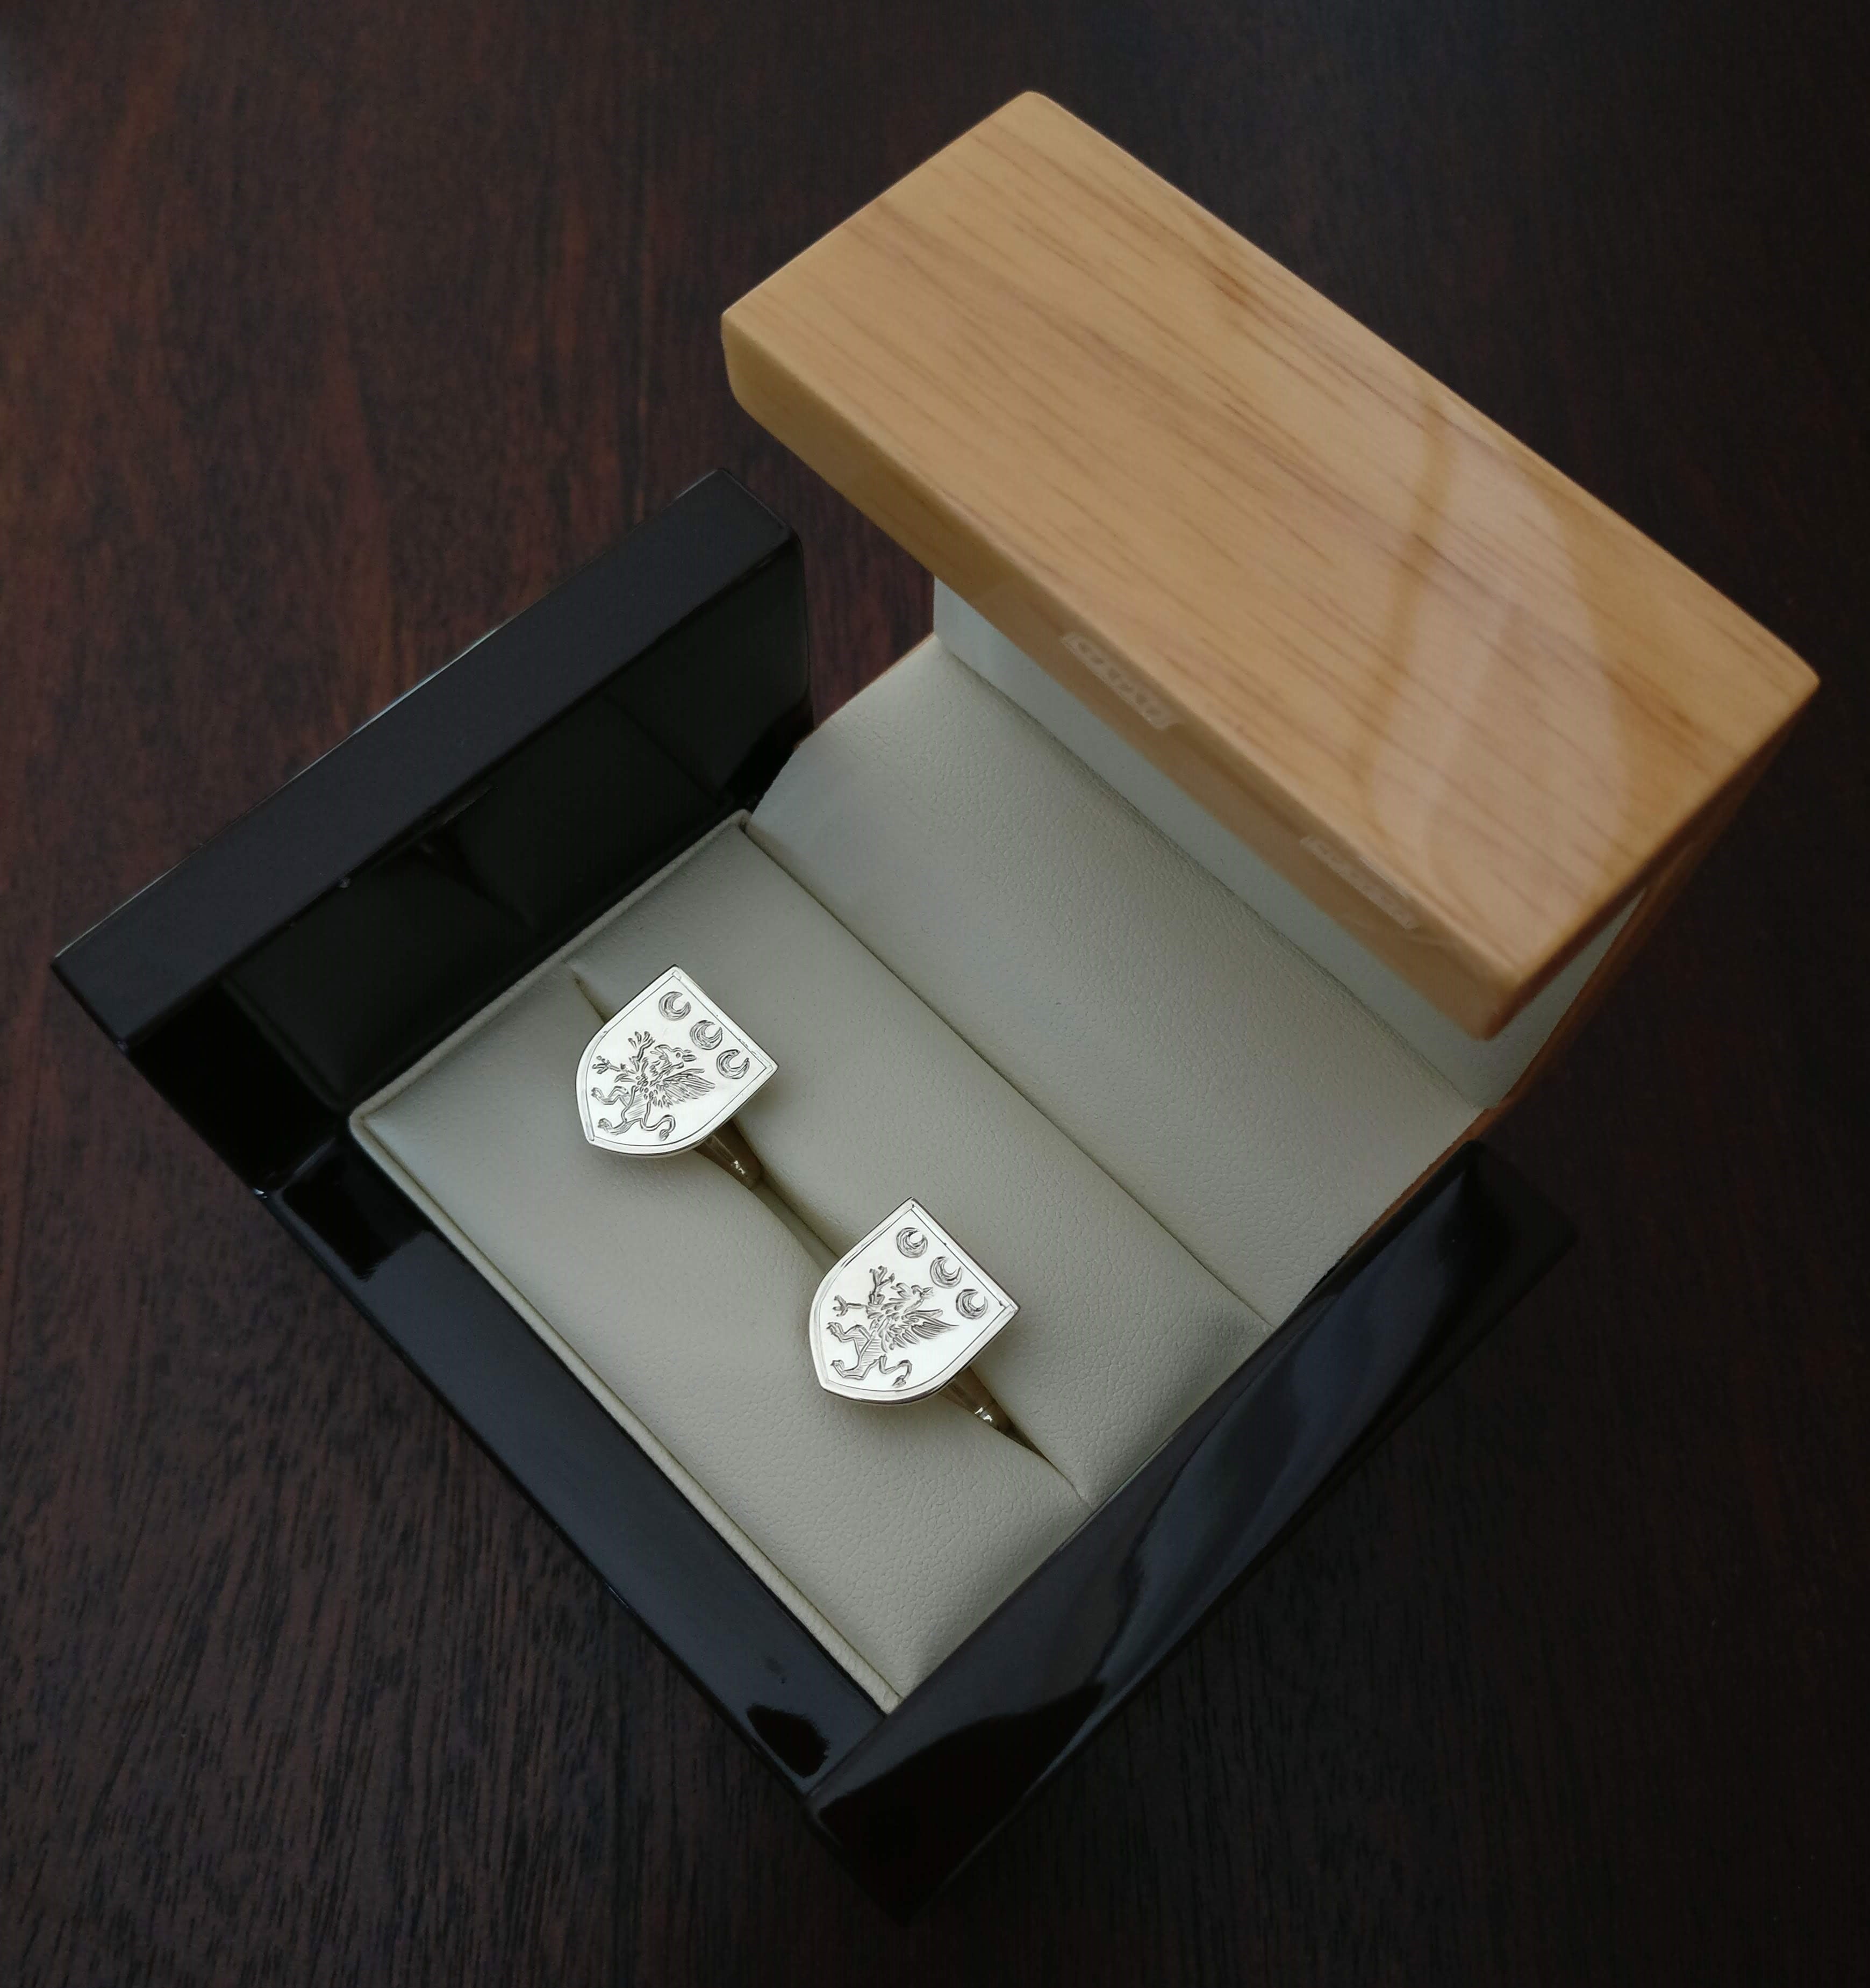 Select Gifts Penarth Wales Family Crest Coat Of Arms Sterling Silver Cufflinks Engraved Box